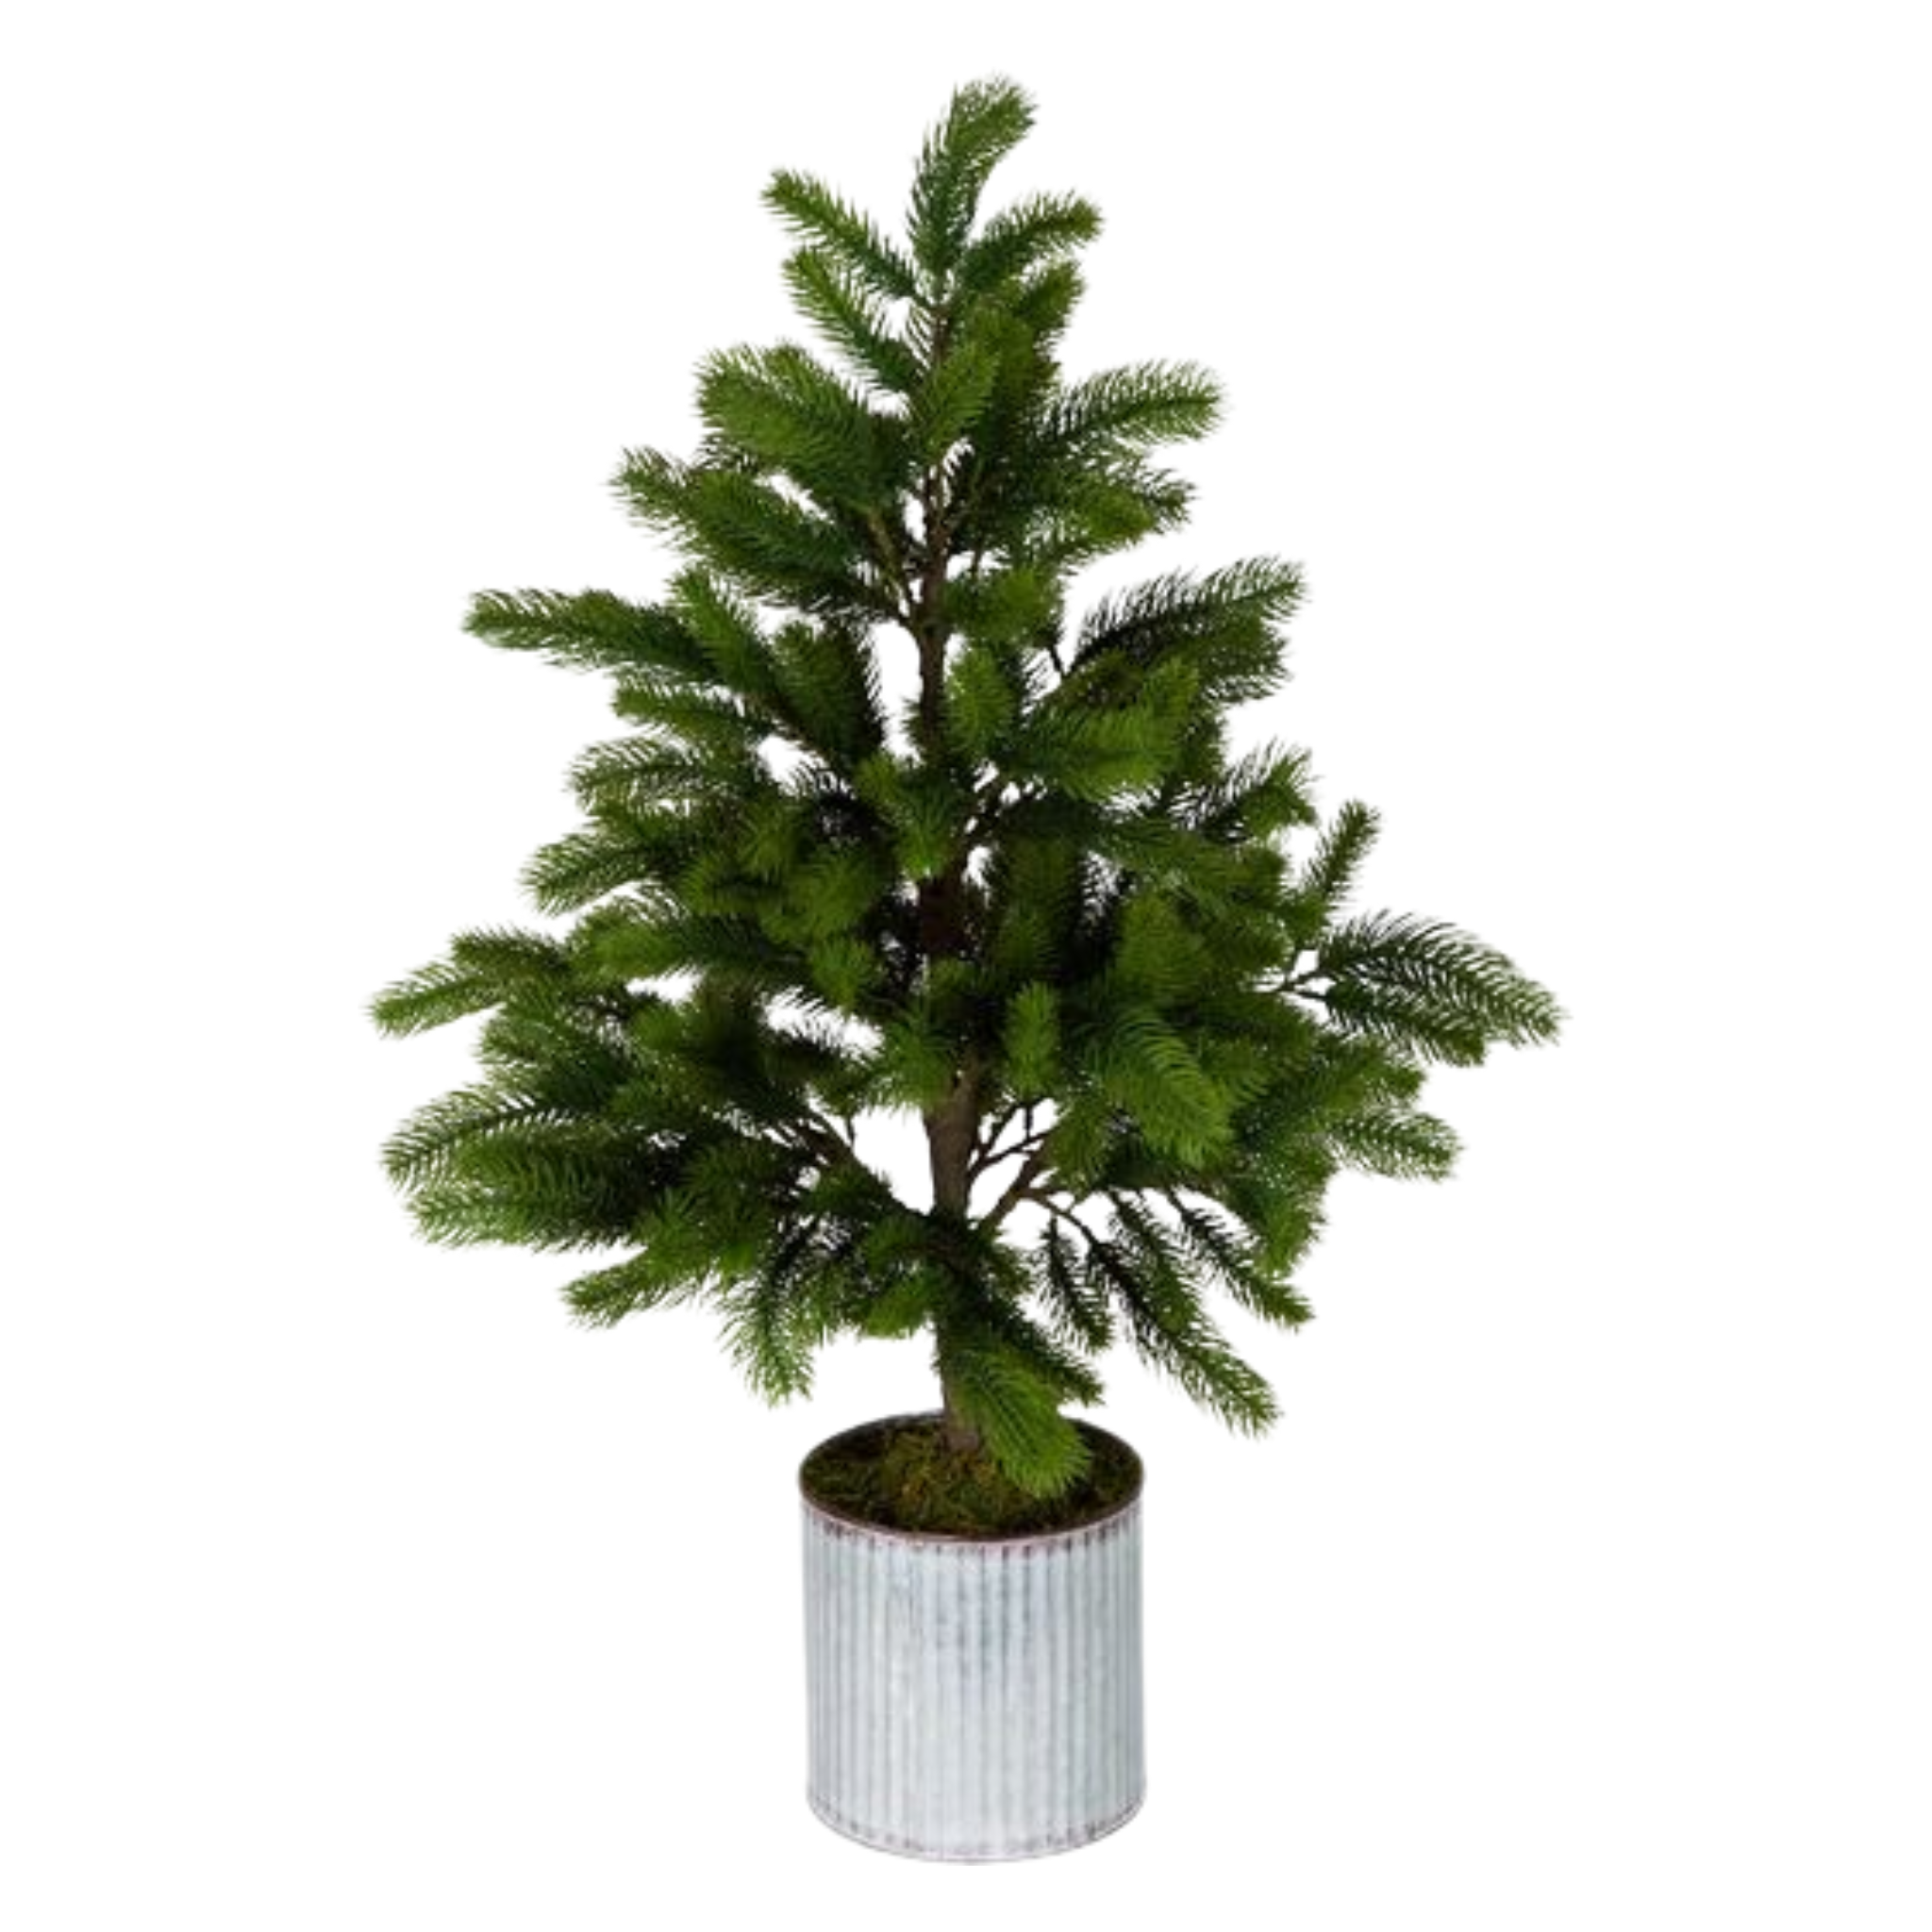 Marmont Small Tin Potted Pine Tree